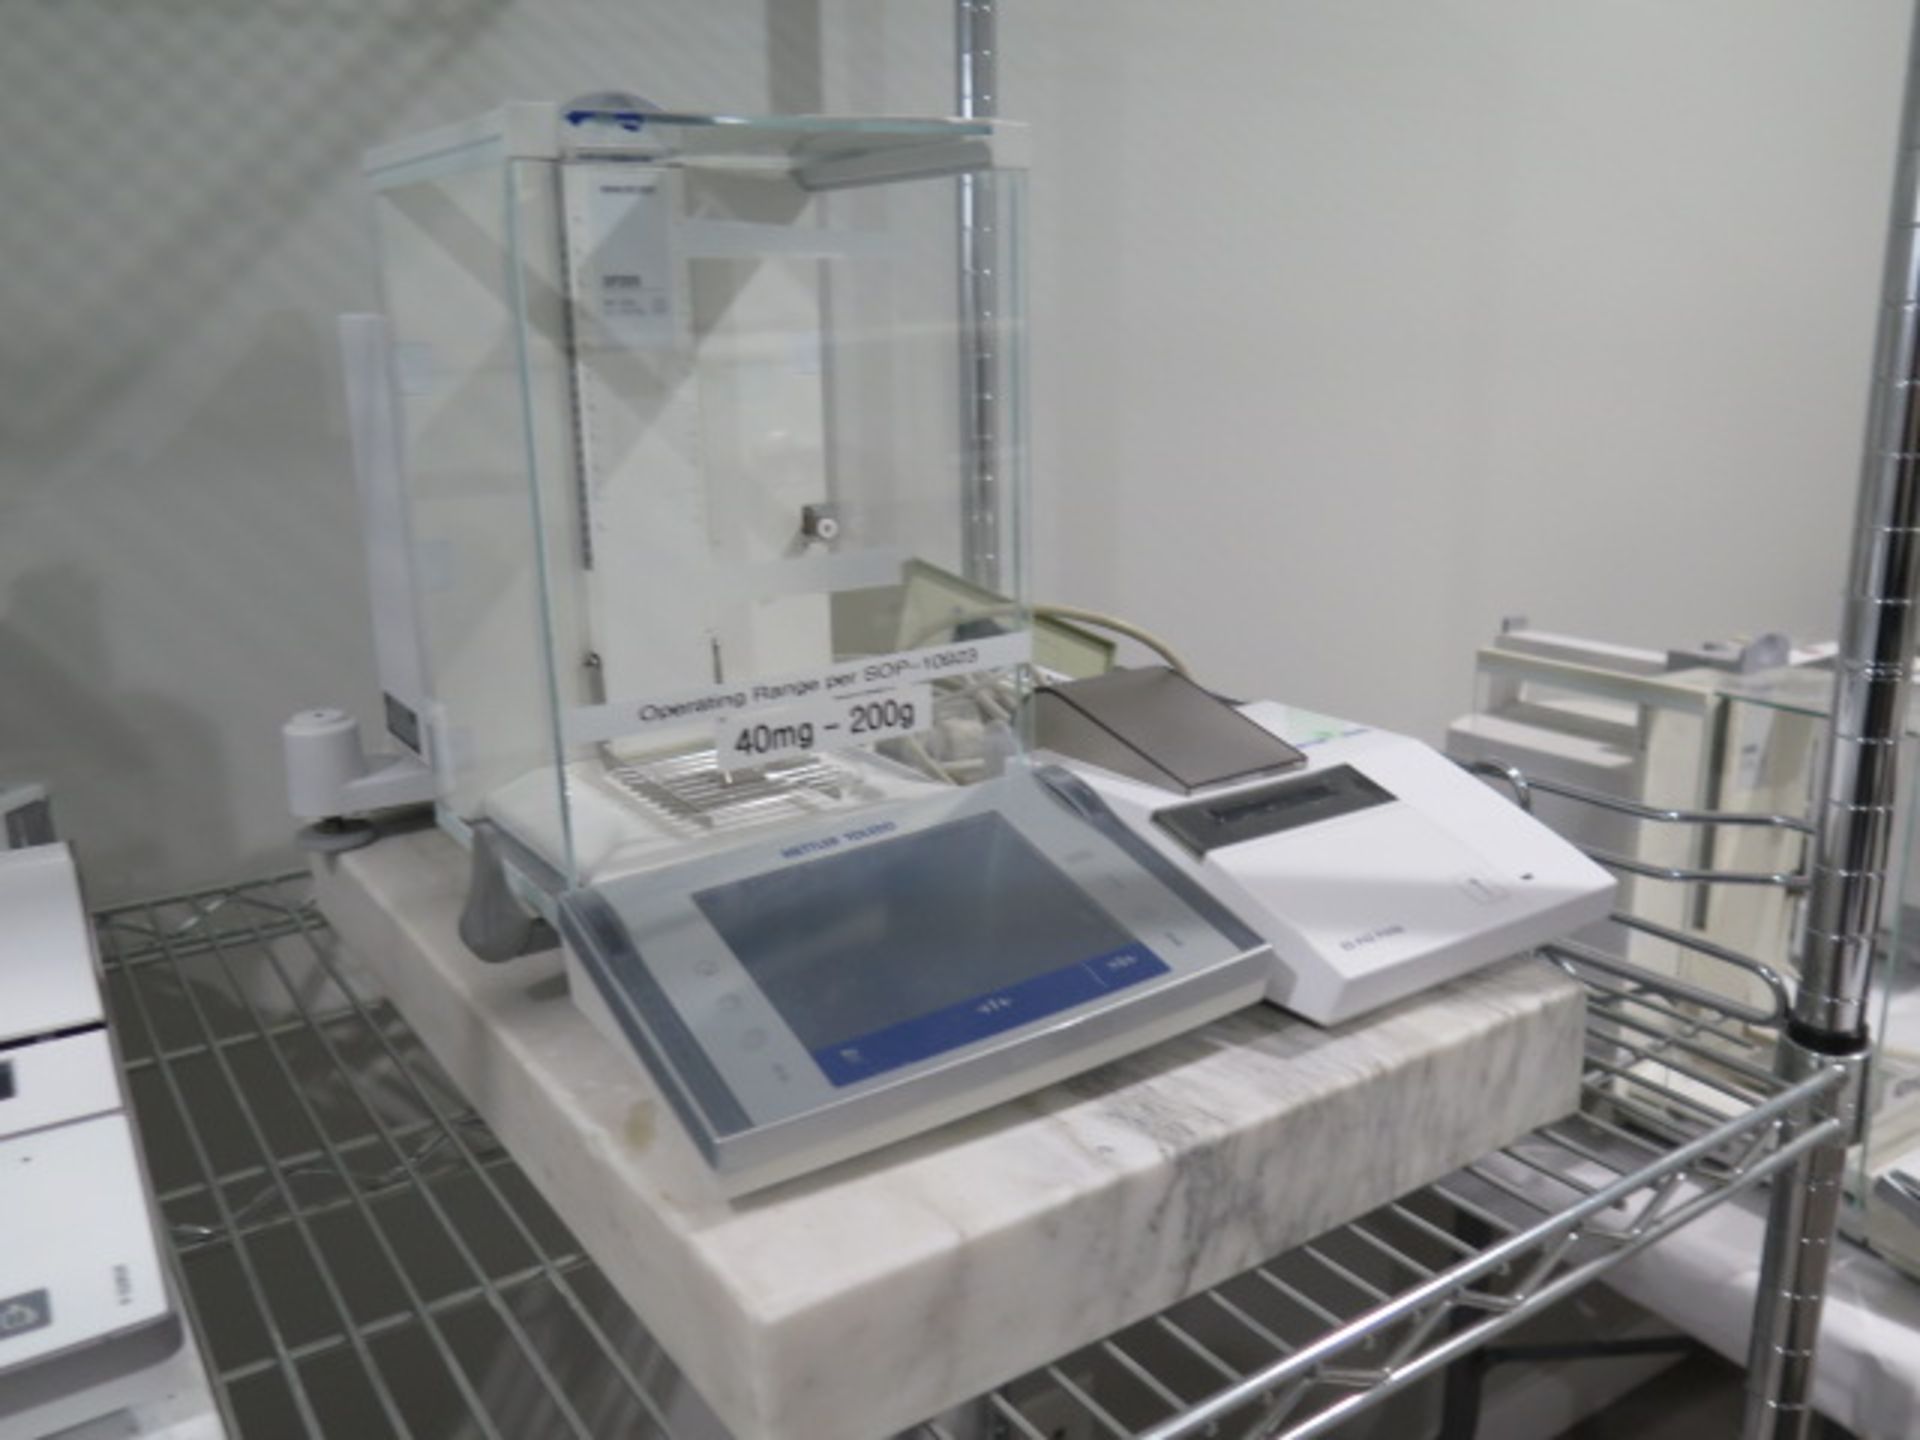 Mettler Toledo XP205 DeltaRange Analytical Balance Scale 0.01mg-220g w/ Static Detect, SOLD AS IS - Image 2 of 9